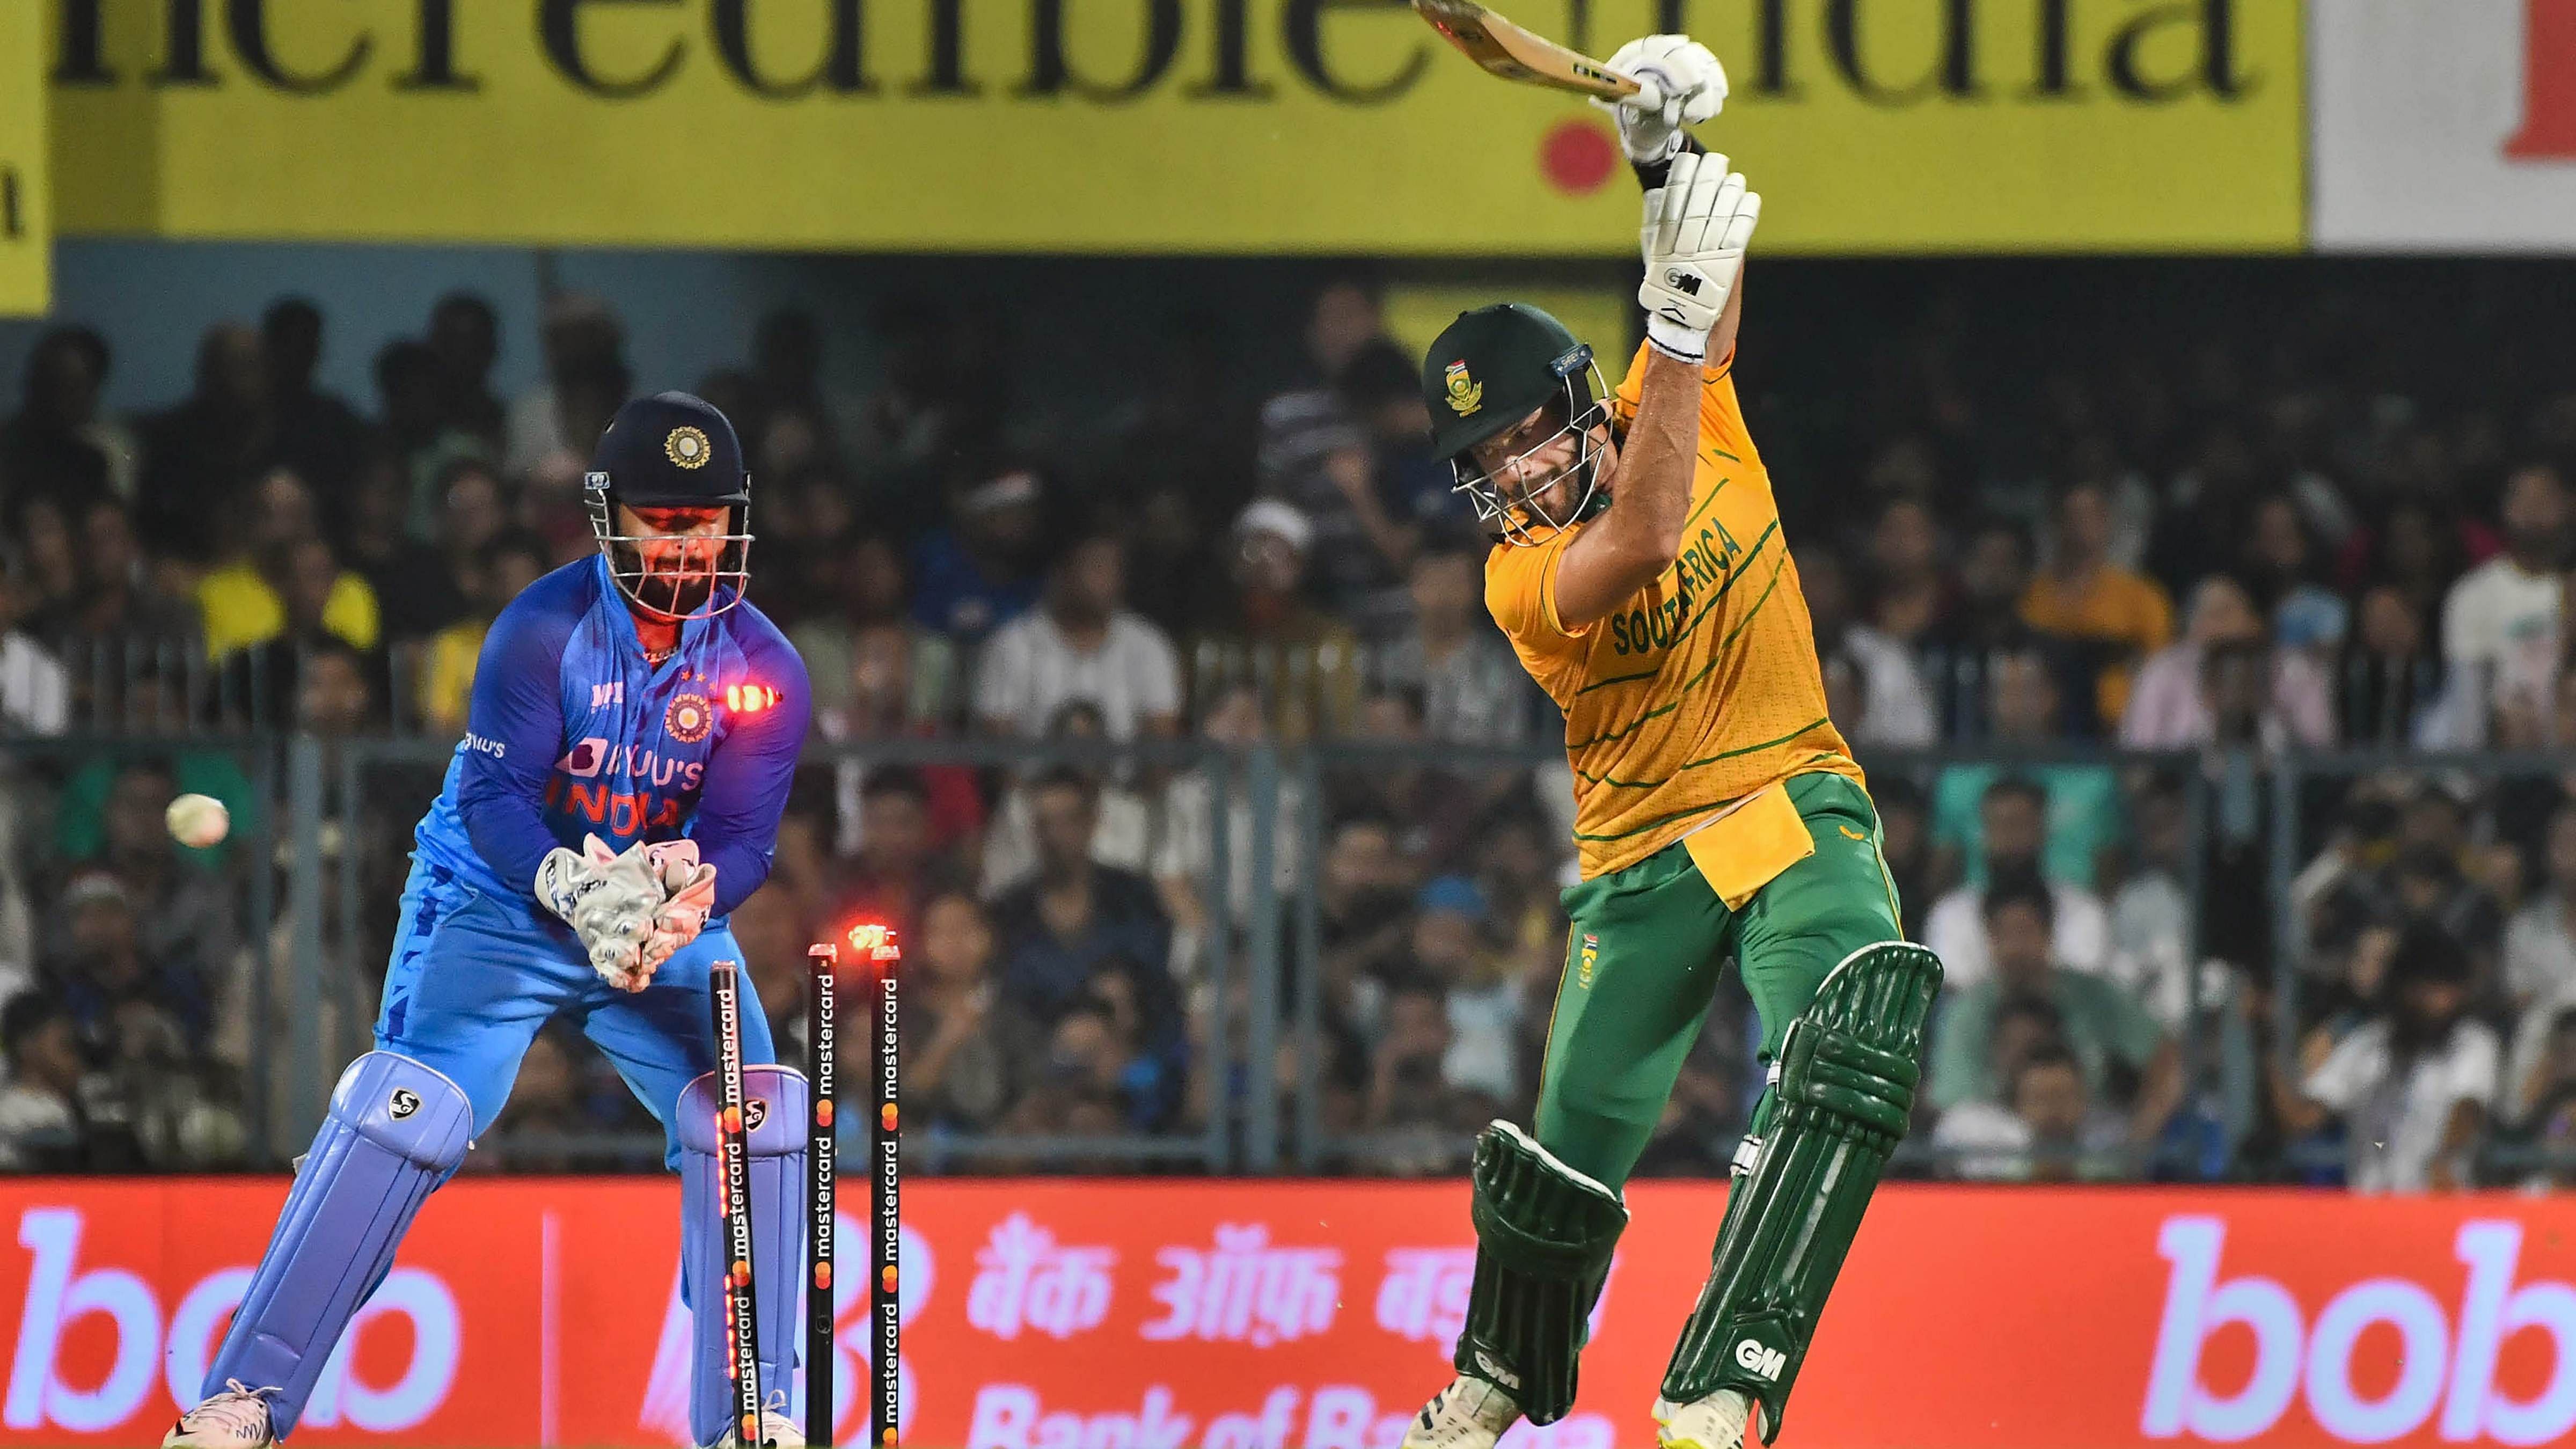 South African batter Markram being bowled out during the 2nd T20 cricket match. Credit: PTI Photo